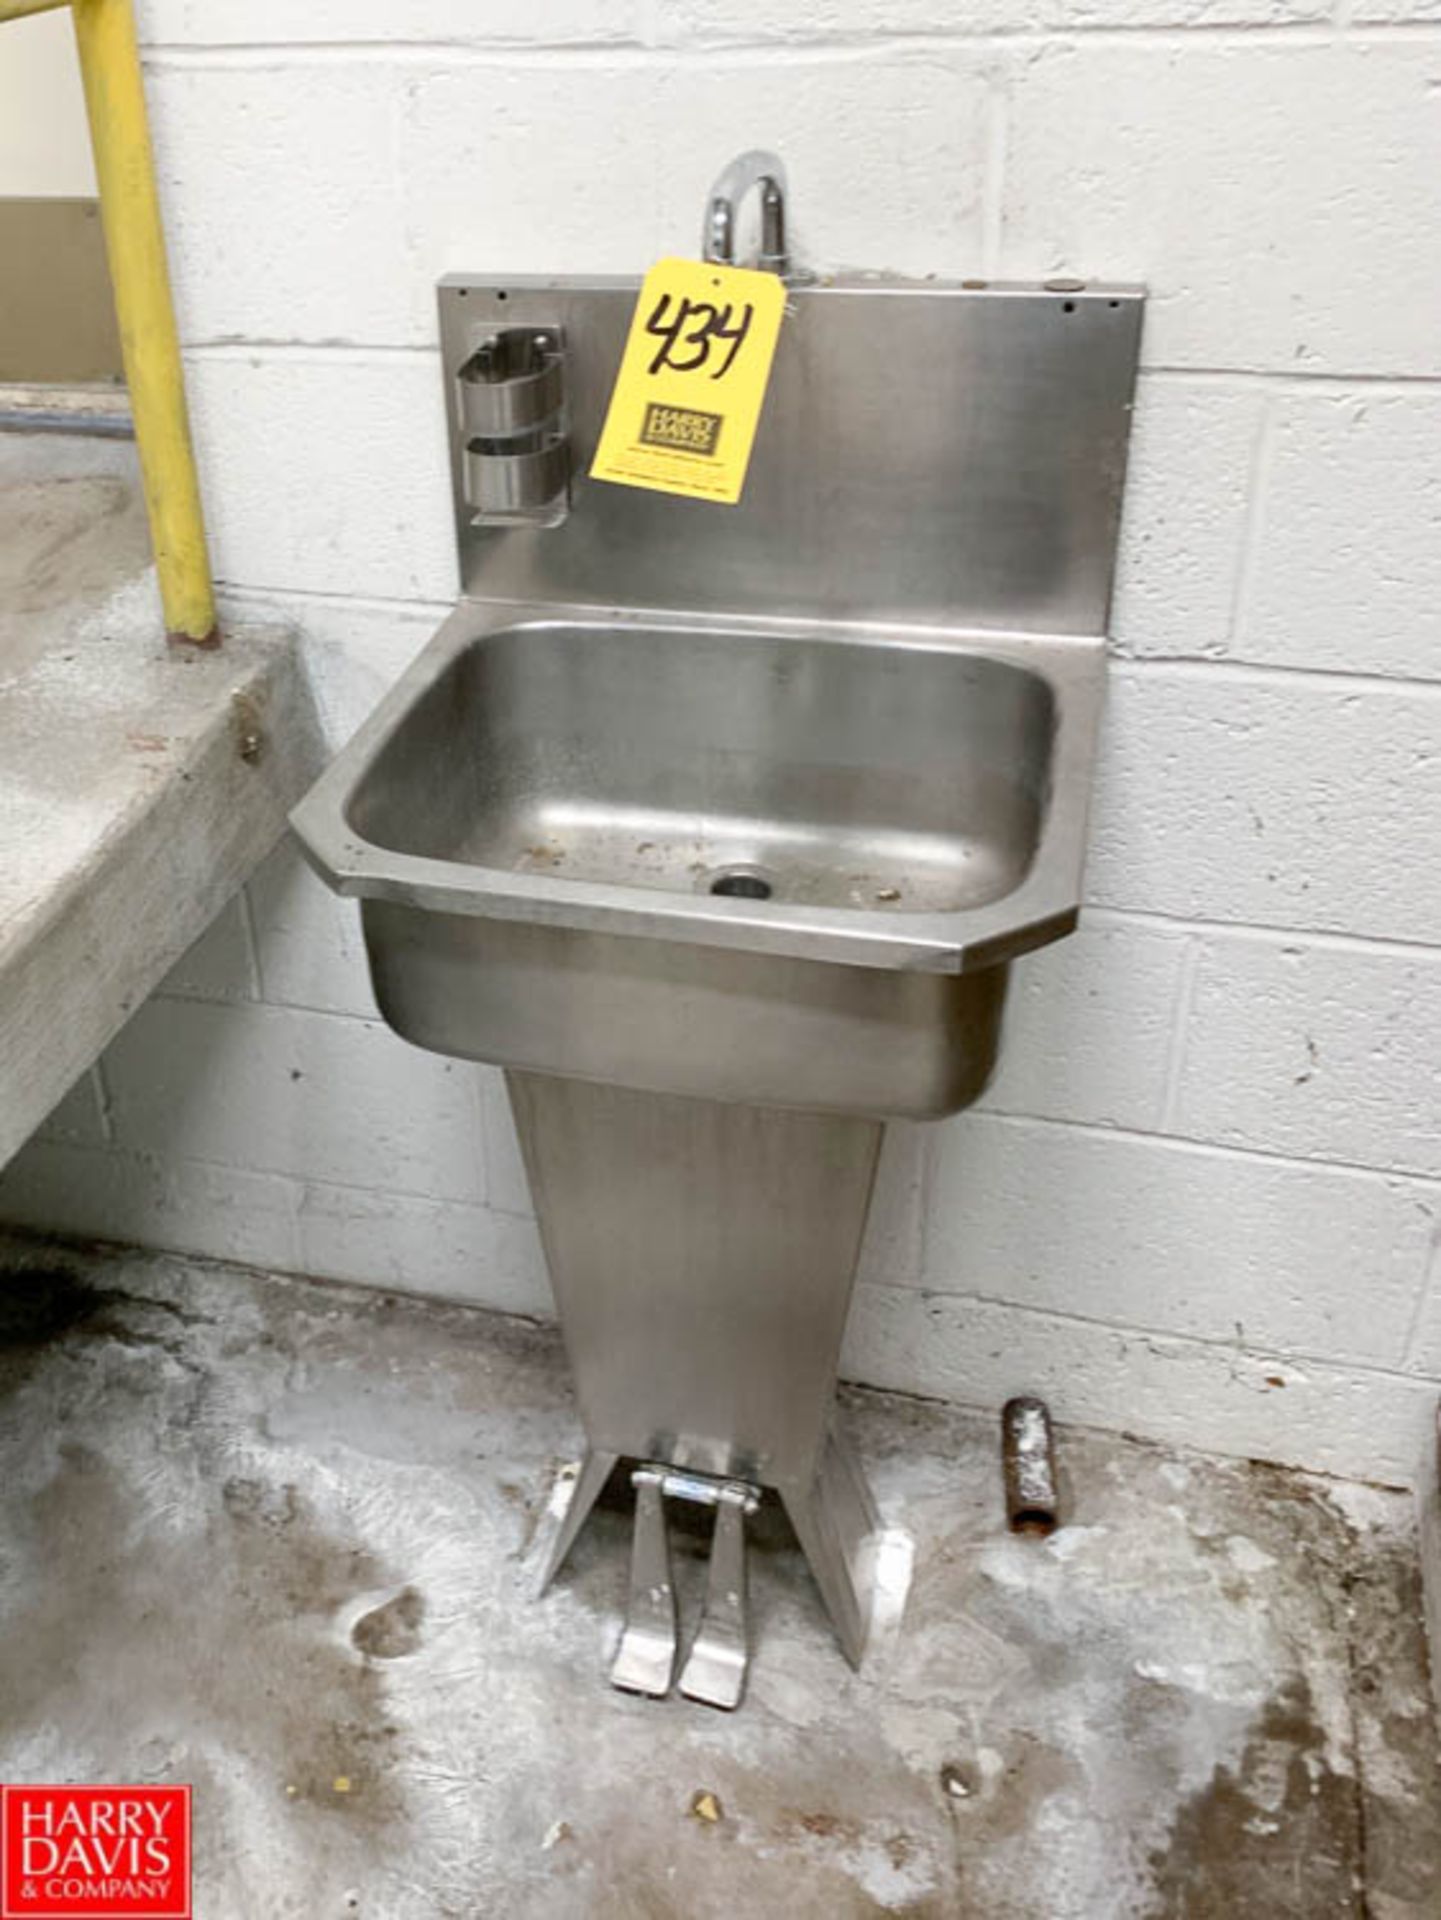 S/S Wash Sink with Foot Controls - Rigging Fee: $ 50